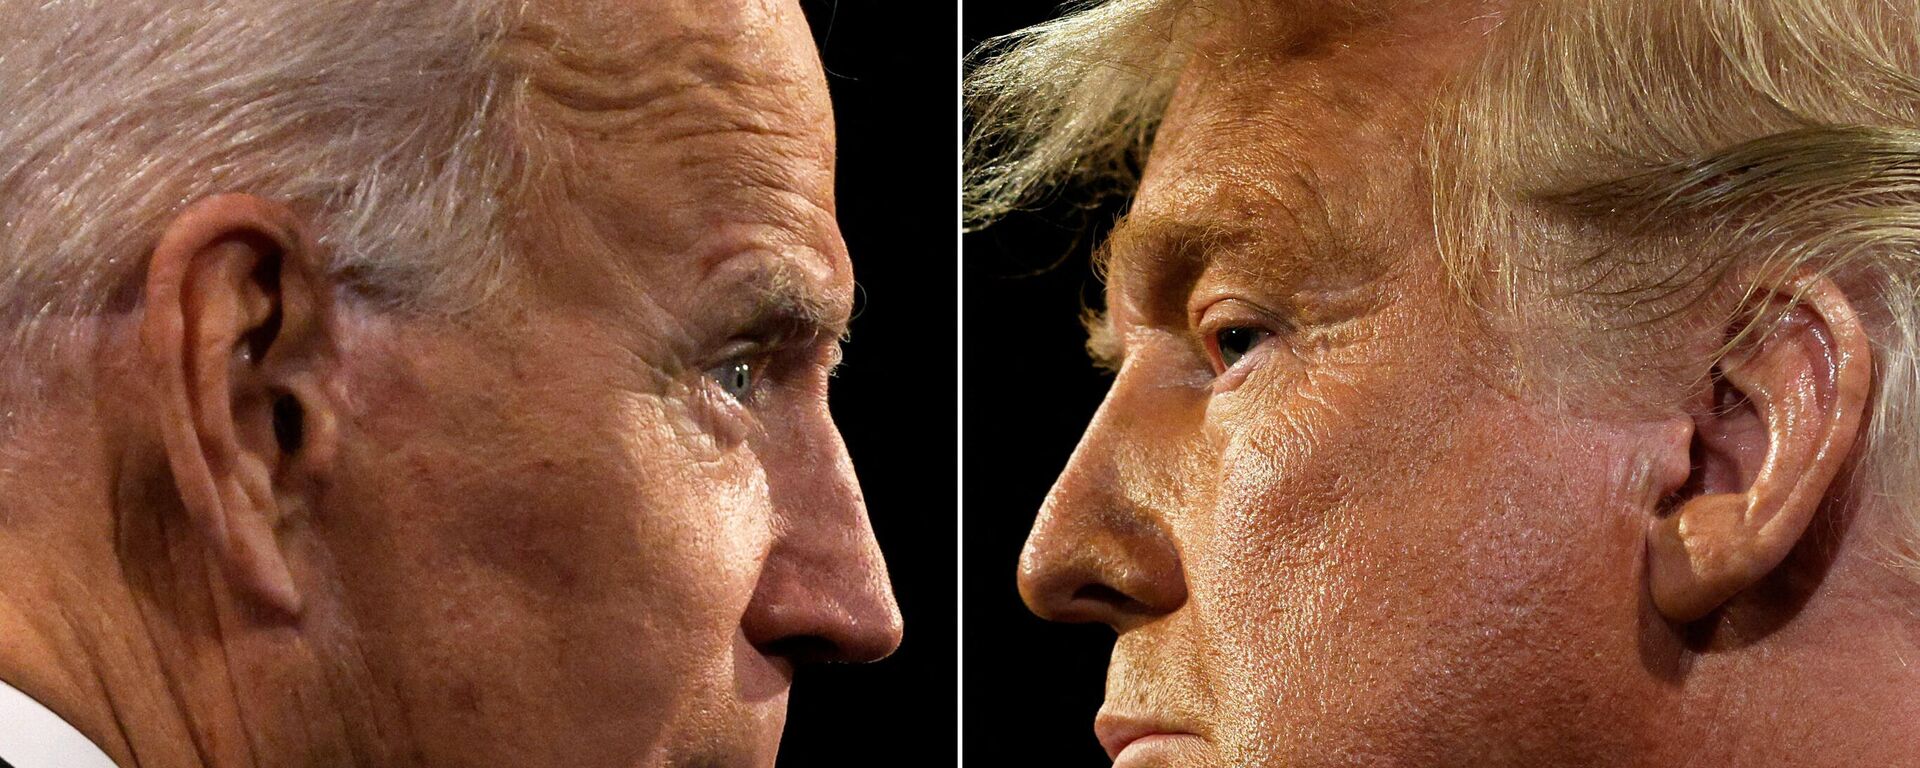 (COMBO) This combination of pictures created on October 22, 2020 shows US President Donald Trump (R) and Democratic Presidential candidate and former US Vice President Joe Biden during the final presidential debate at Belmont University in Nashville, Tennessee, on October 22, 2020 - Sputnik International, 1920, 23.12.2021